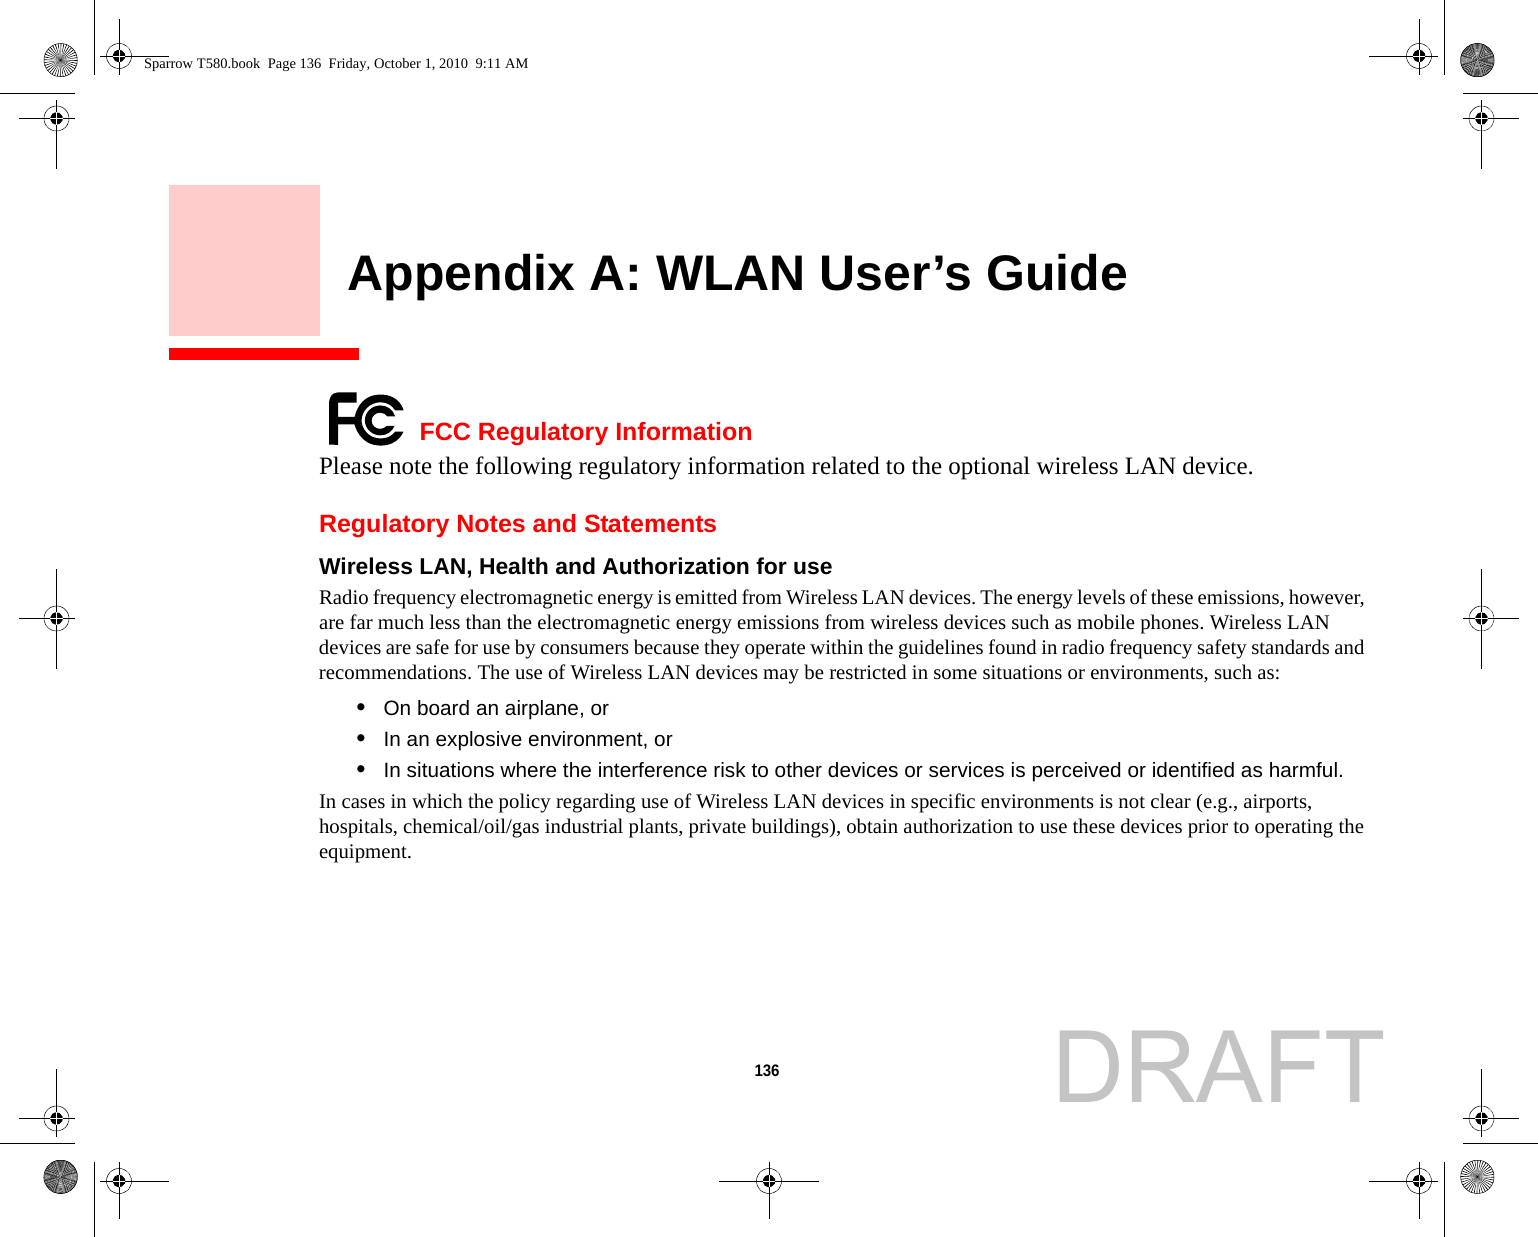 136     Appendix A: WLAN User’s Guide FCC Regulatory InformationPlease note the following regulatory information related to the optional wireless LAN device.Regulatory Notes and StatementsWireless LAN, Health and Authorization for use  Radio frequency electromagnetic energy is emitted from Wireless LAN devices. The energy levels of these emissions, however, are far much less than the electromagnetic energy emissions from wireless devices such as mobile phones. Wireless LAN devices are safe for use by consumers because they operate within the guidelines found in radio frequency safety standards and recommendations. The use of Wireless LAN devices may be restricted in some situations or environments, such as:•On board an airplane, or•In an explosive environment, or•In situations where the interference risk to other devices or services is perceived or identified as harmful.In cases in which the policy regarding use of Wireless LAN devices in specific environments is not clear (e.g., airports, hospitals, chemical/oil/gas industrial plants, private buildings), obtain authorization to use these devices prior to operating the equipment.Sparrow T580.book  Page 136  Friday, October 1, 2010  9:11 AMDRAFT